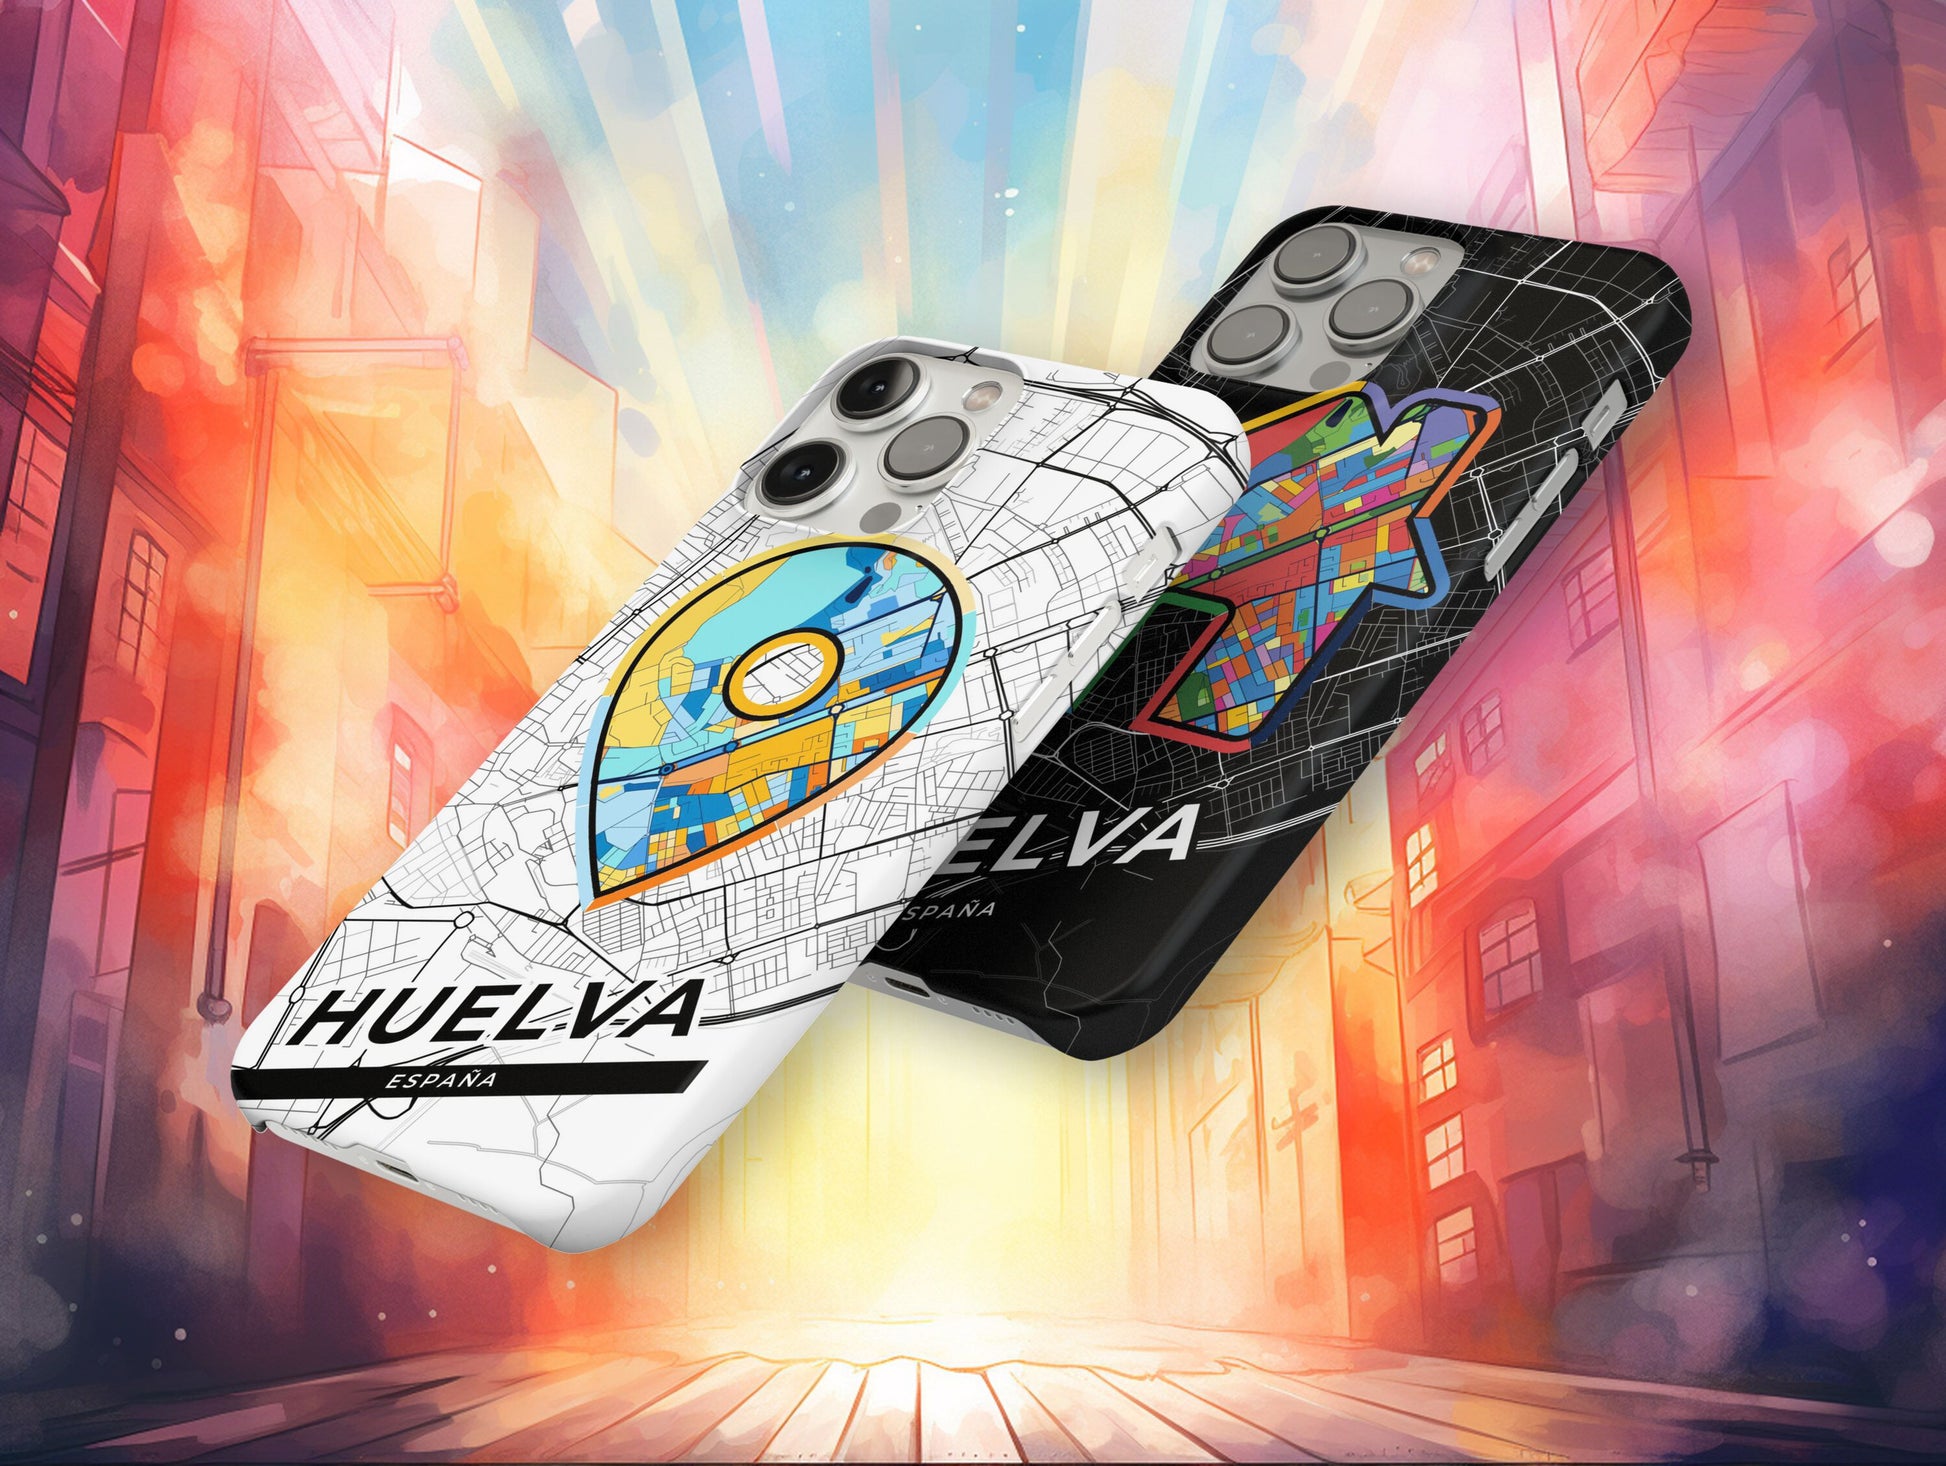 Huelva Spain slim phone case with colorful icon. Birthday, wedding or housewarming gift. Couple match cases.